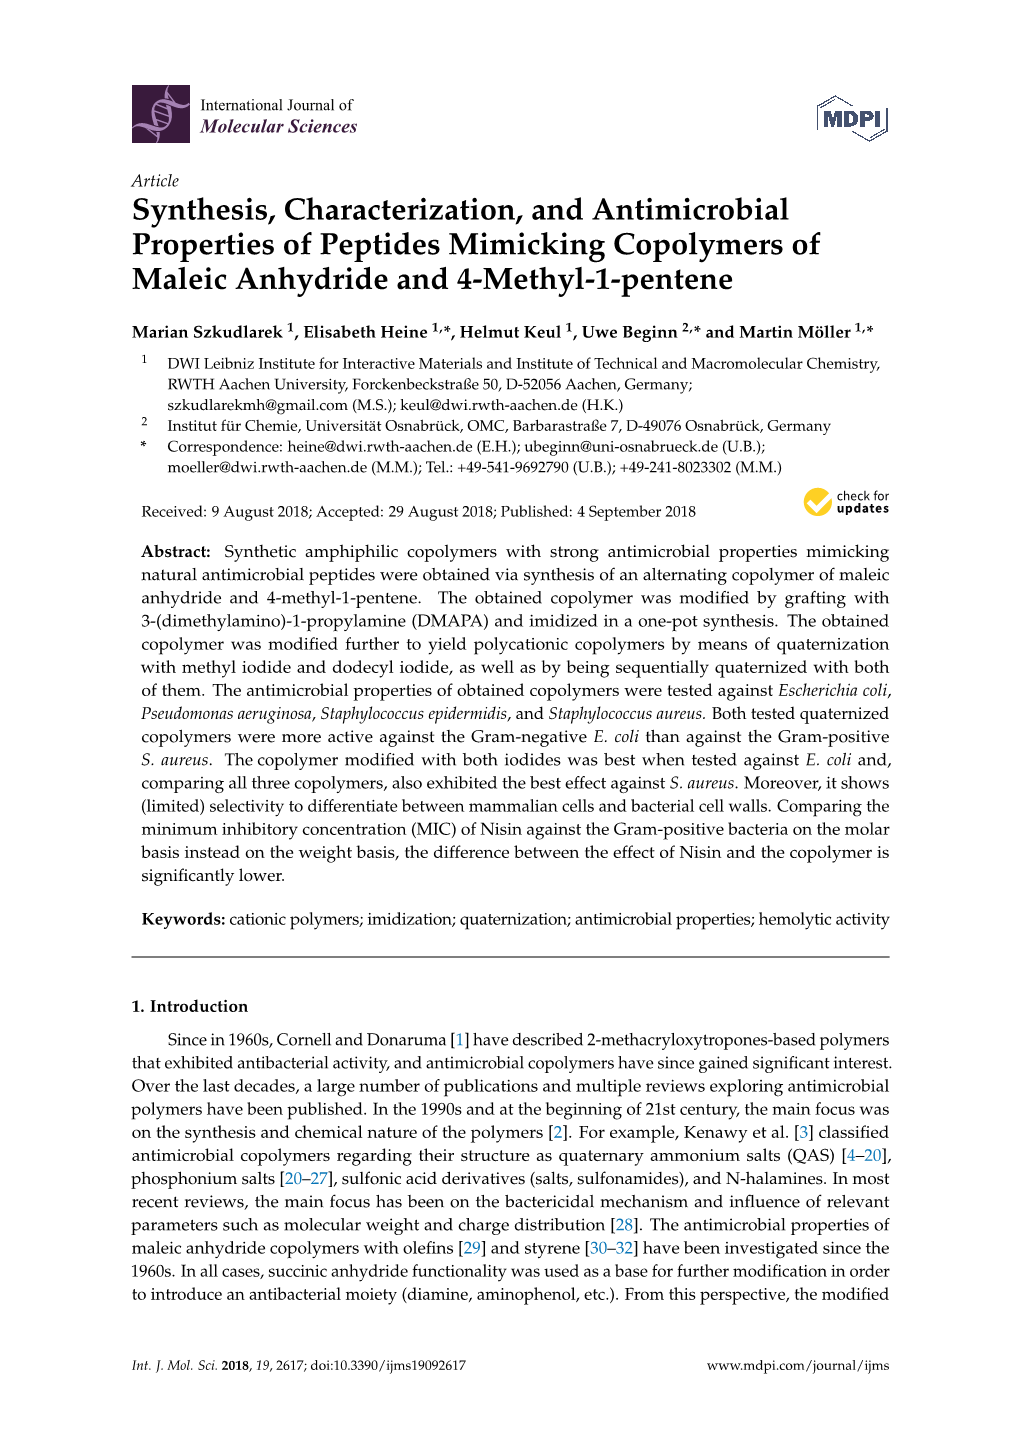 Synthesis, Characterization, and Antimicrobial Properties of Peptides Mimicking Copolymers of Maleic Anhydride and 4-Methyl-1-Pentene